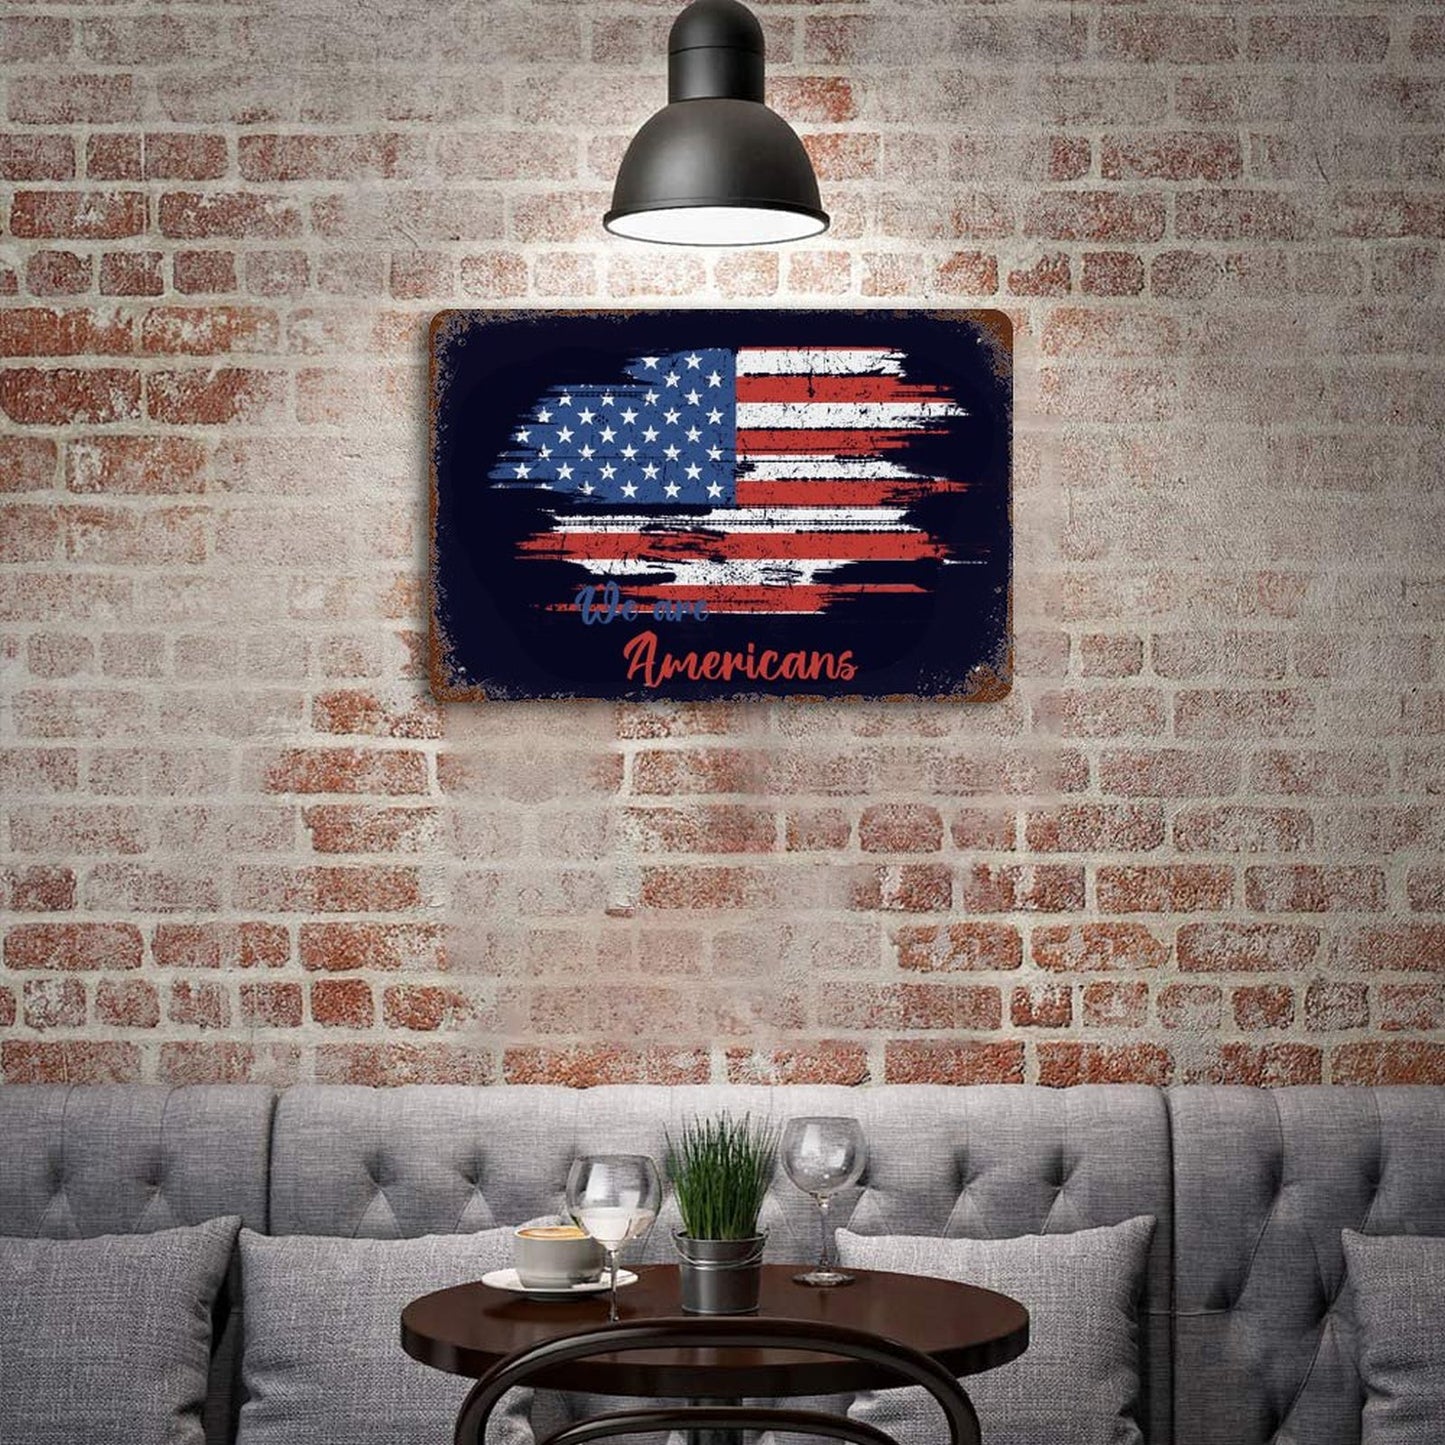 Online DIY Vintage Iron Hanging Plate With Rust Horizontal American Flag